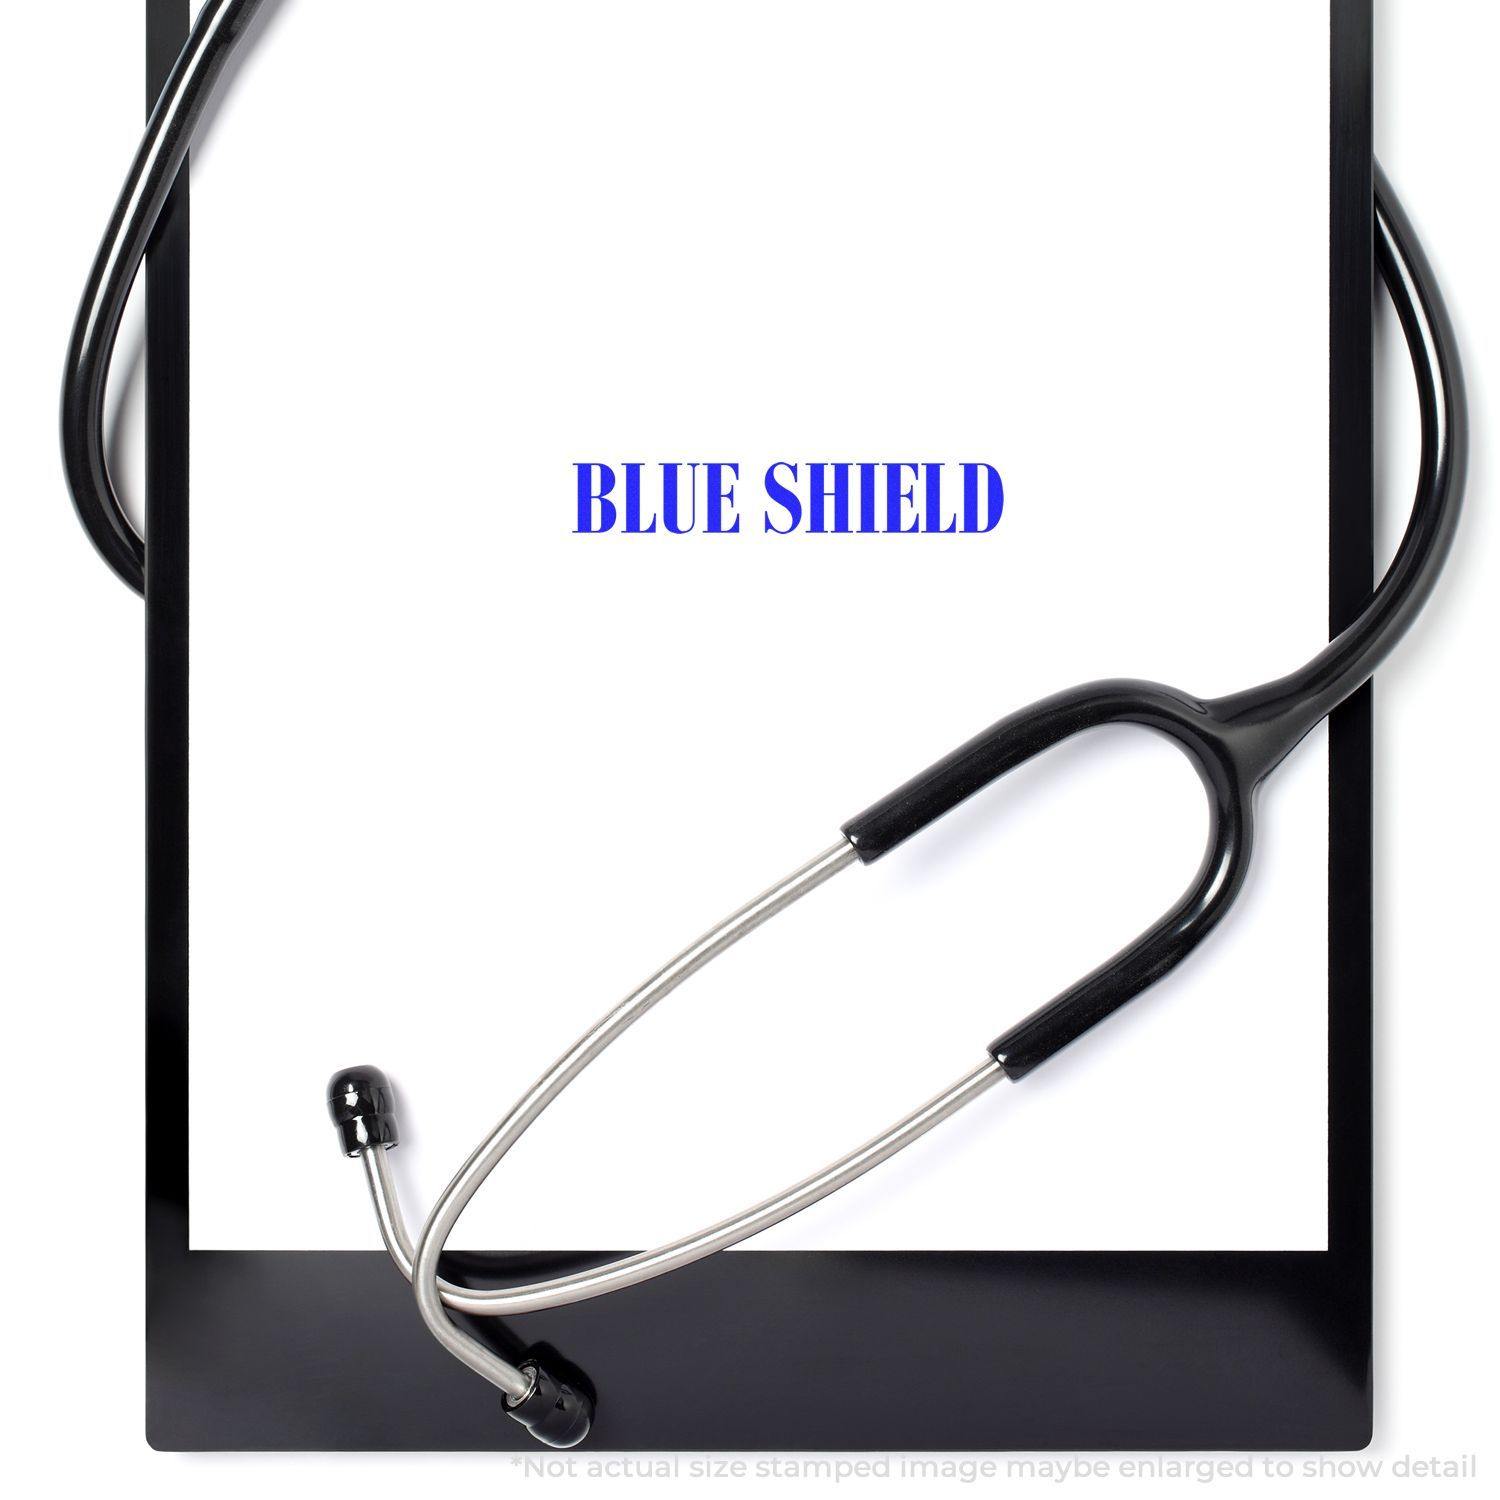 A self-inking stamp with a stamped image showing how the text "BLUE SHIELD" in a large bold font is displayed by it.